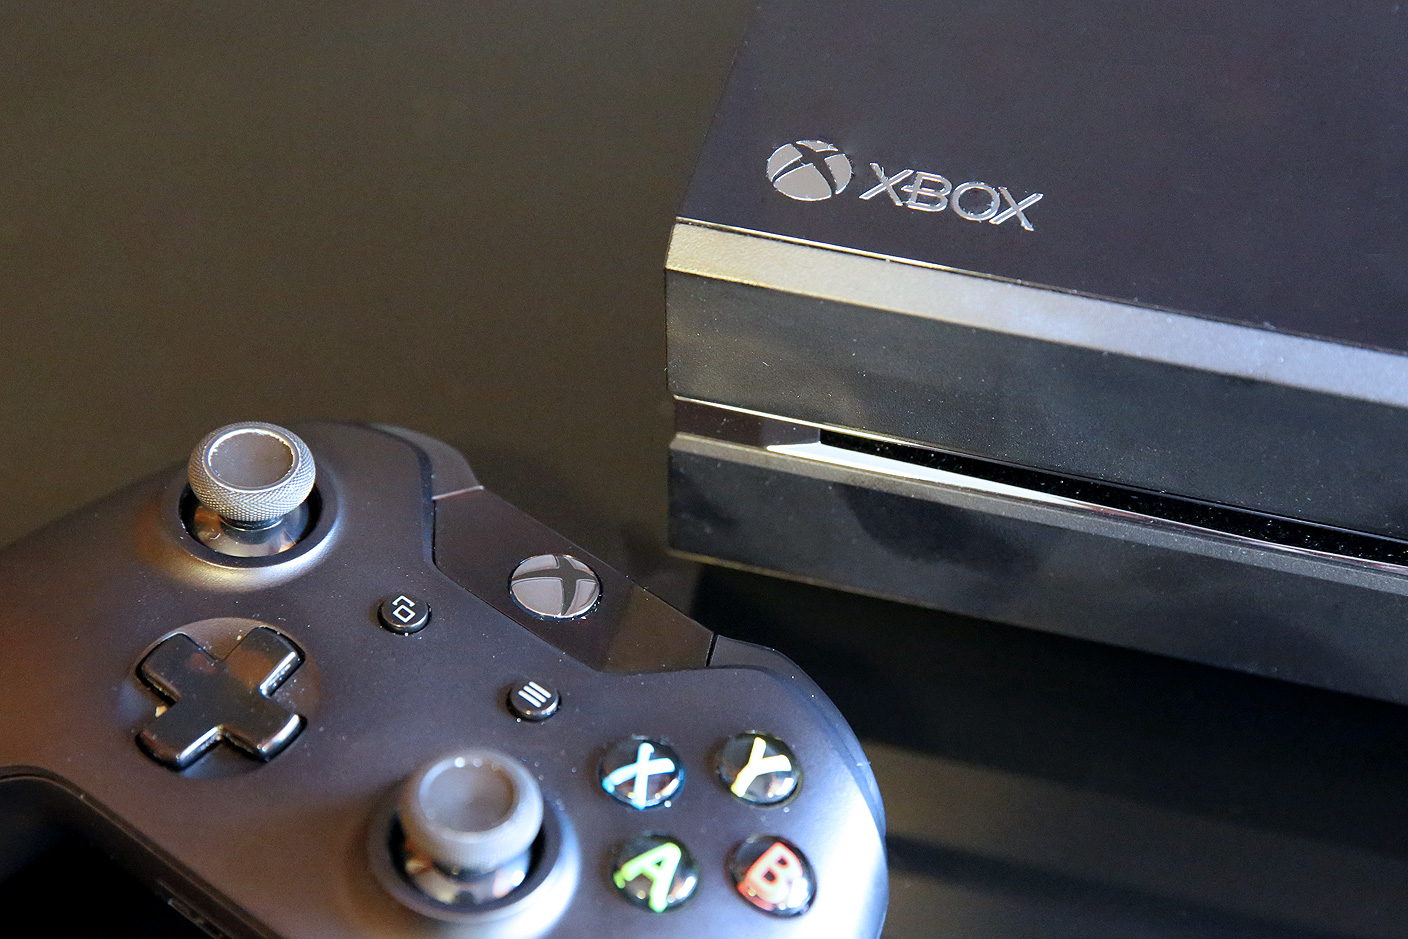 how to format my hard drive for xbox one